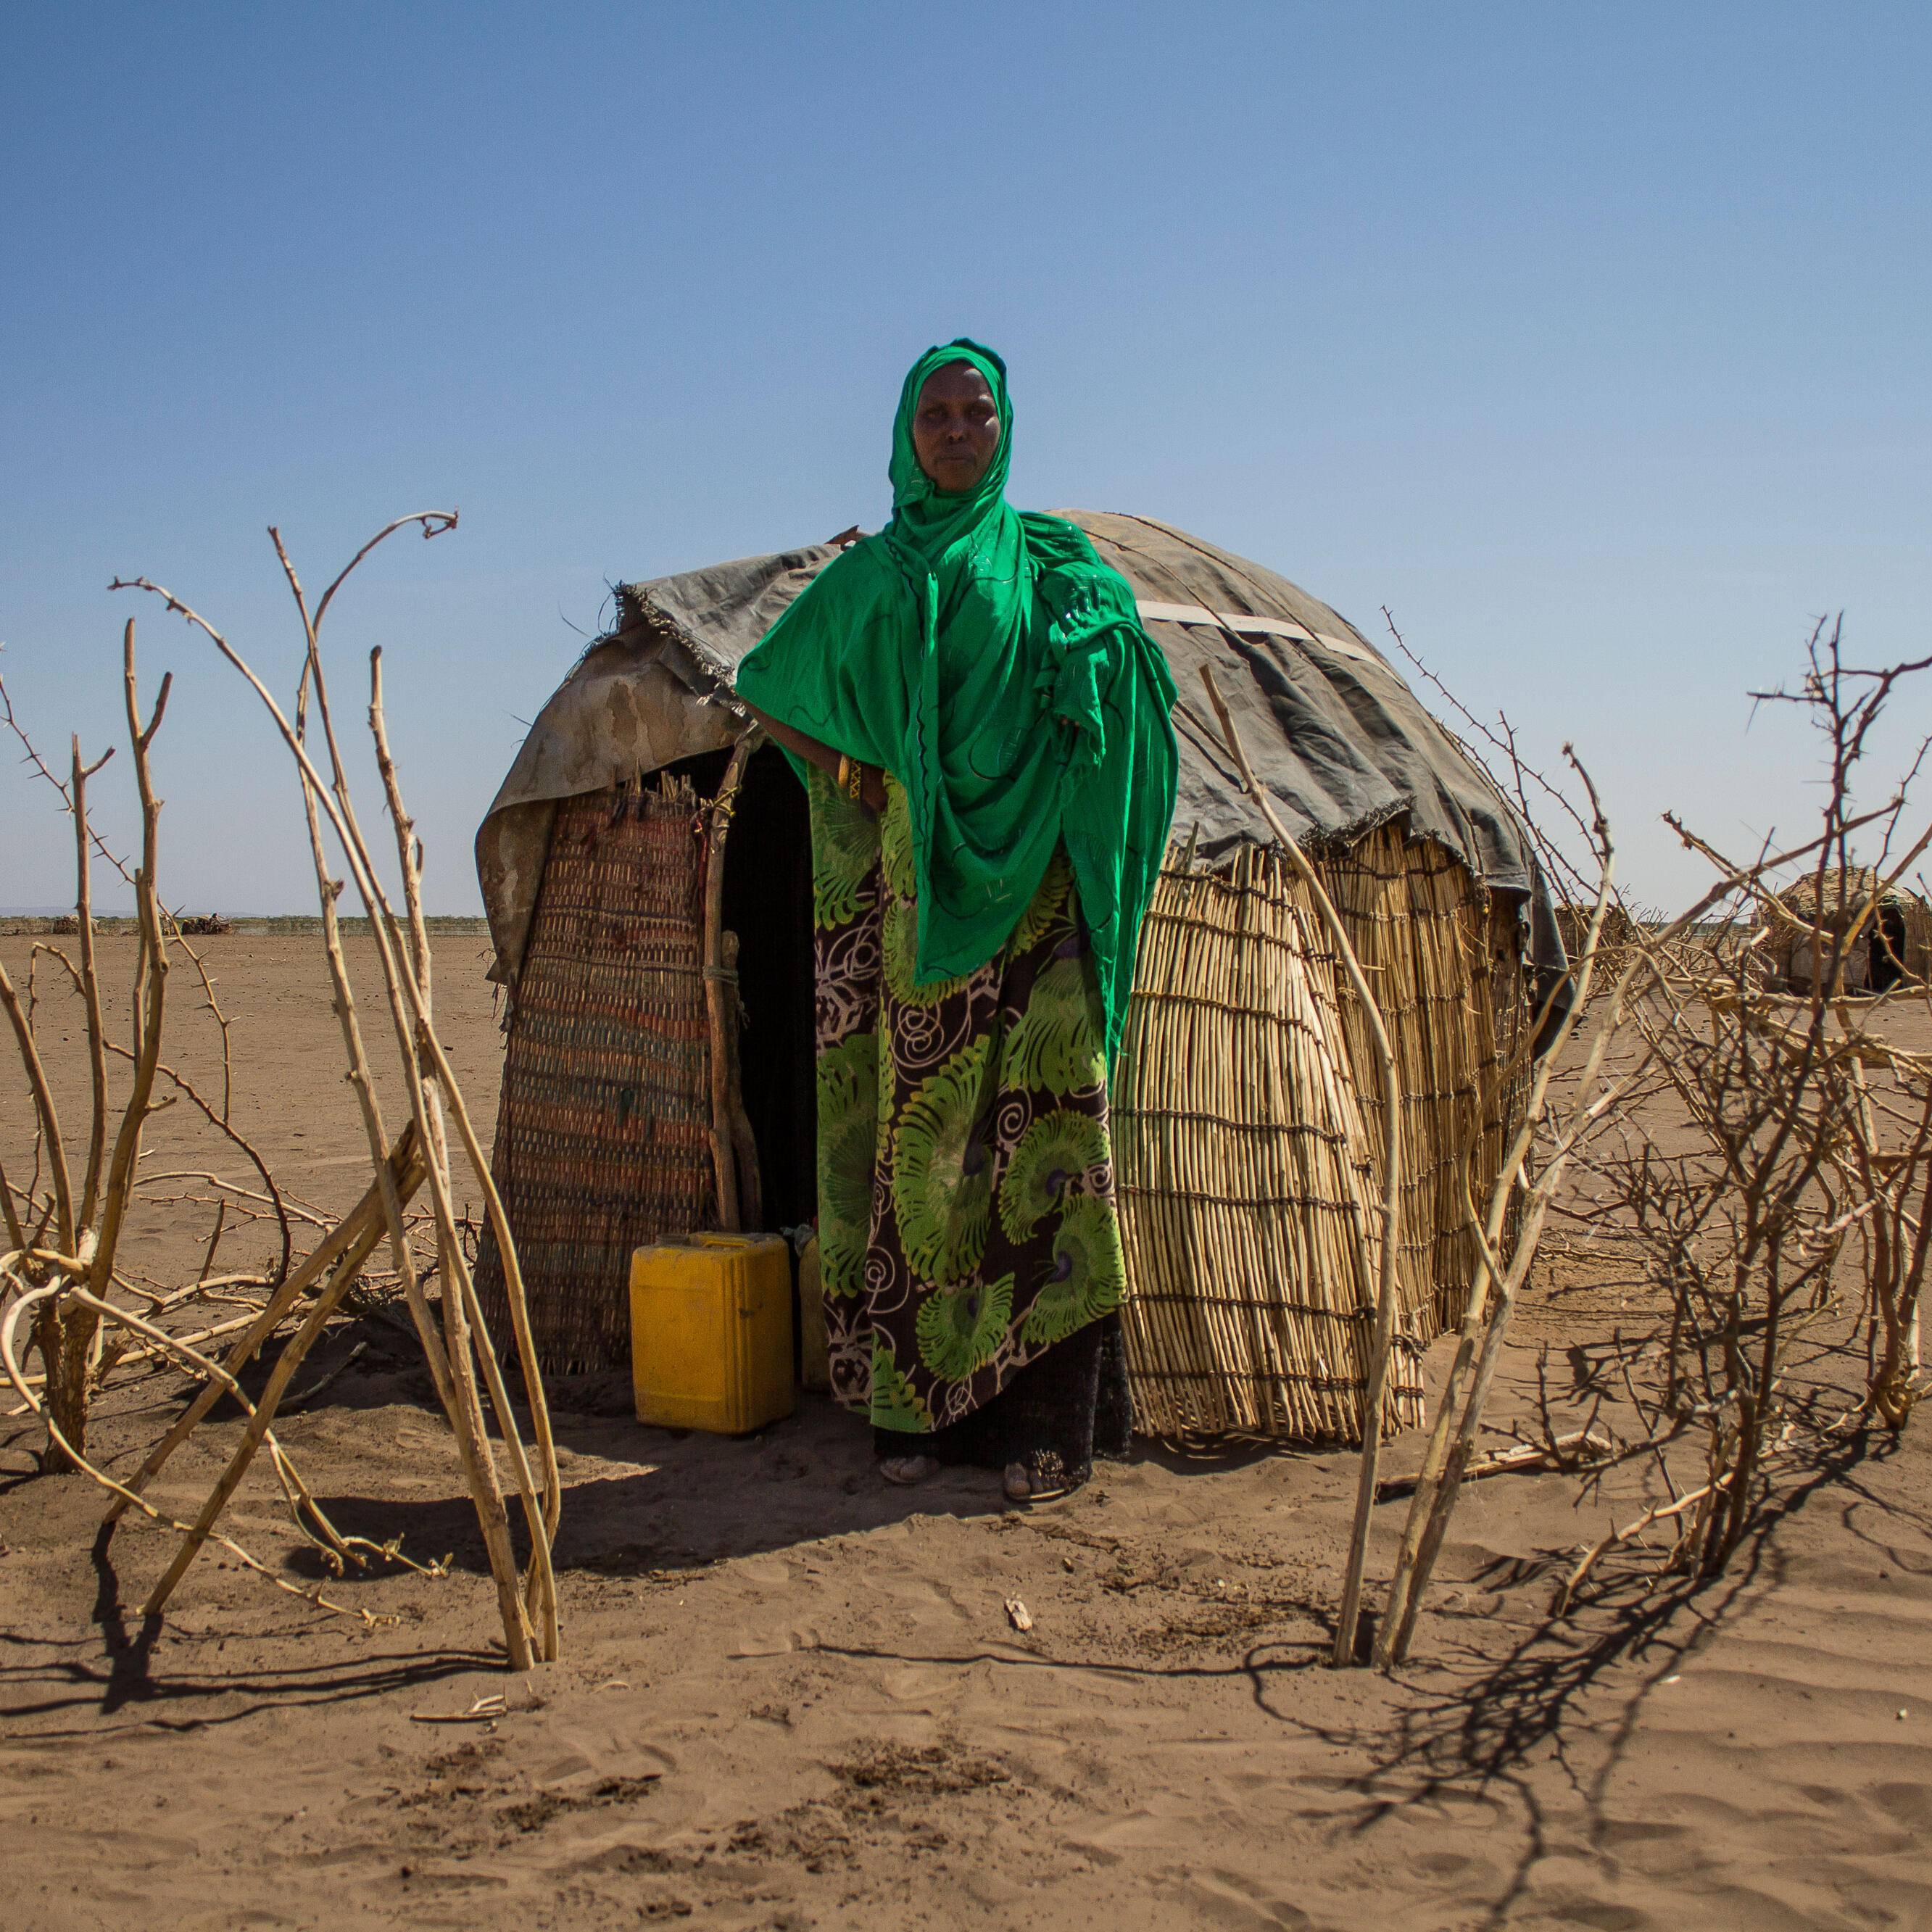 Woman stands in front of temporary shelter in drought-afflicted region.